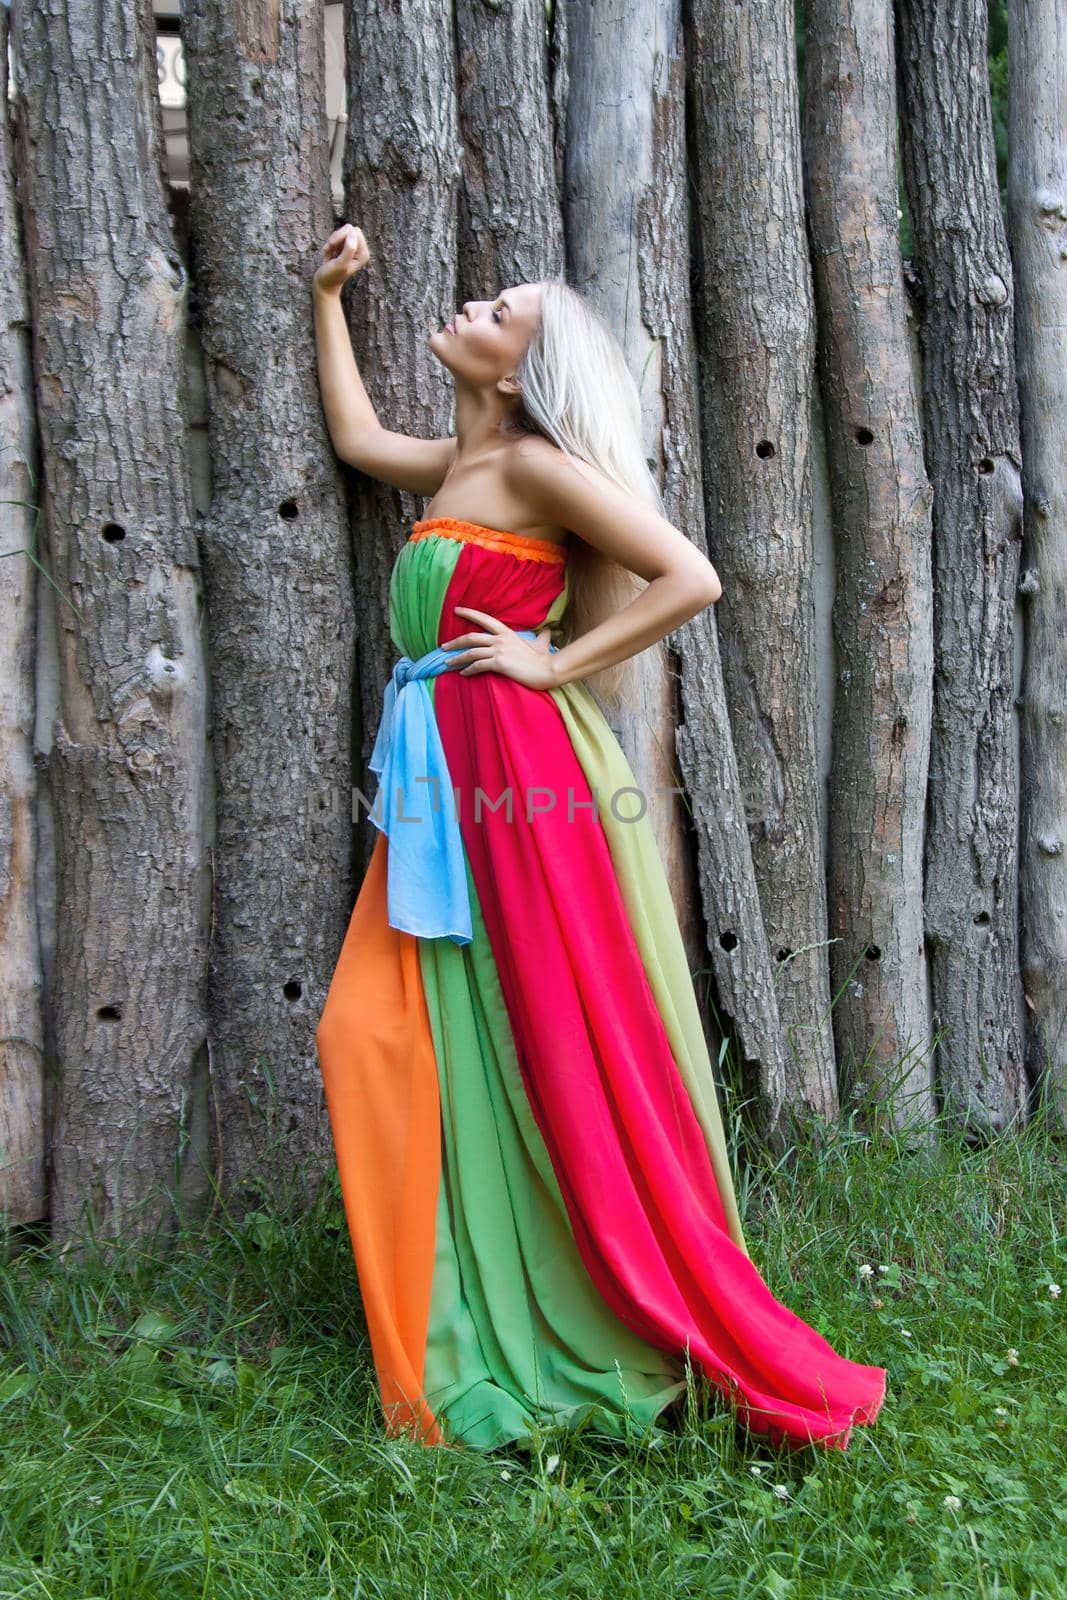 Sexy woman outdoor with nice colorful dress